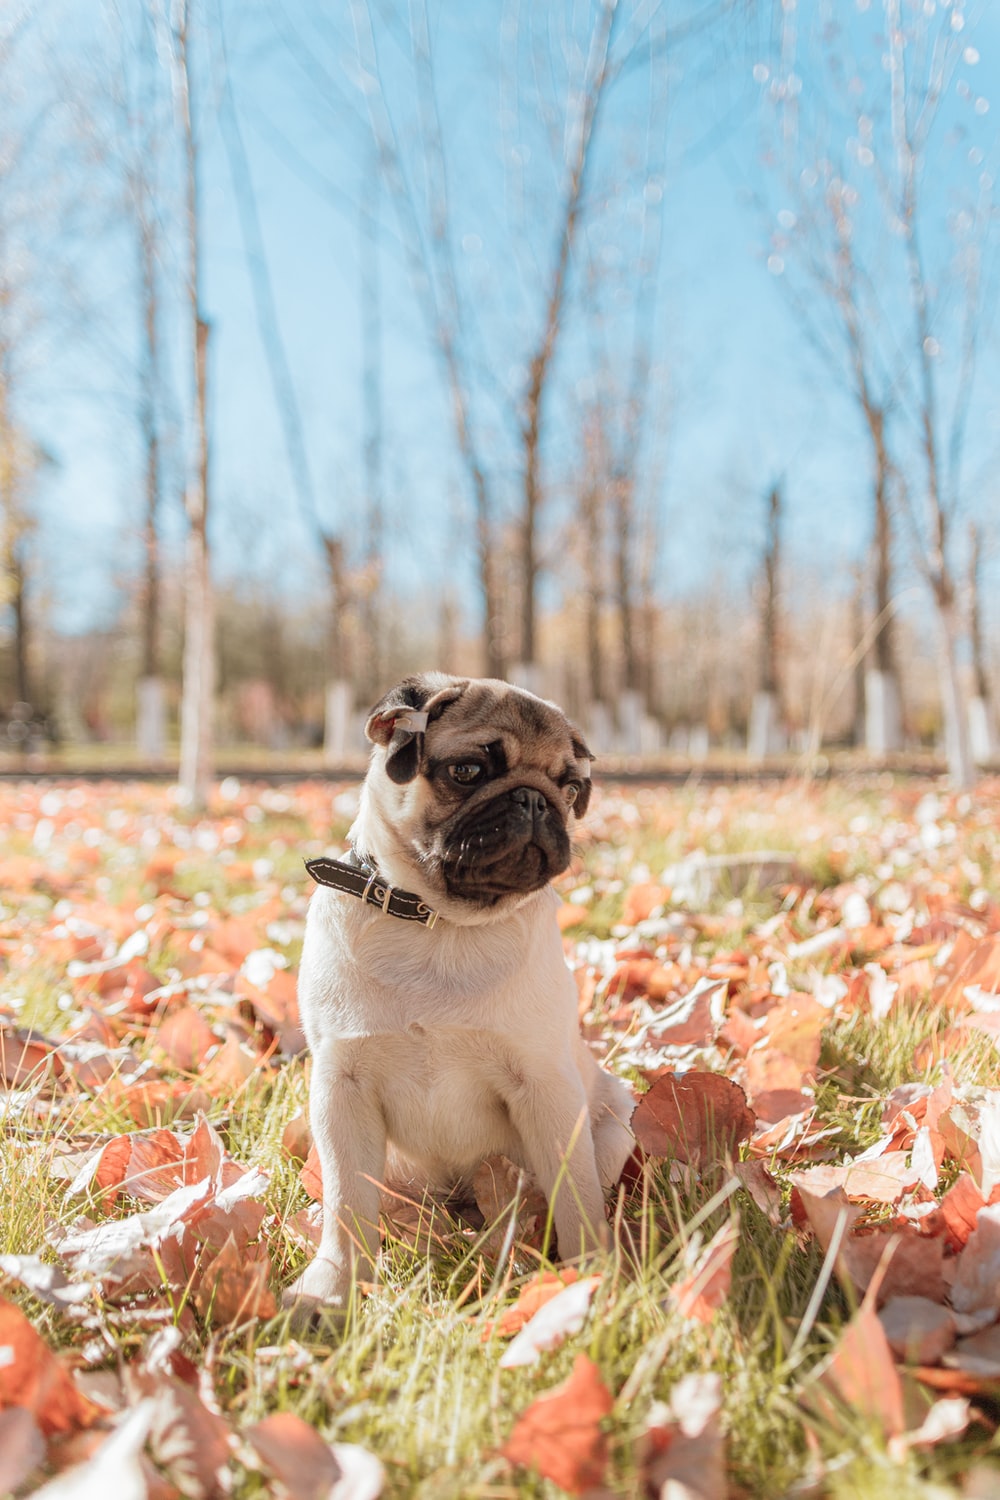 Pug Dog Picture. Download Free Image